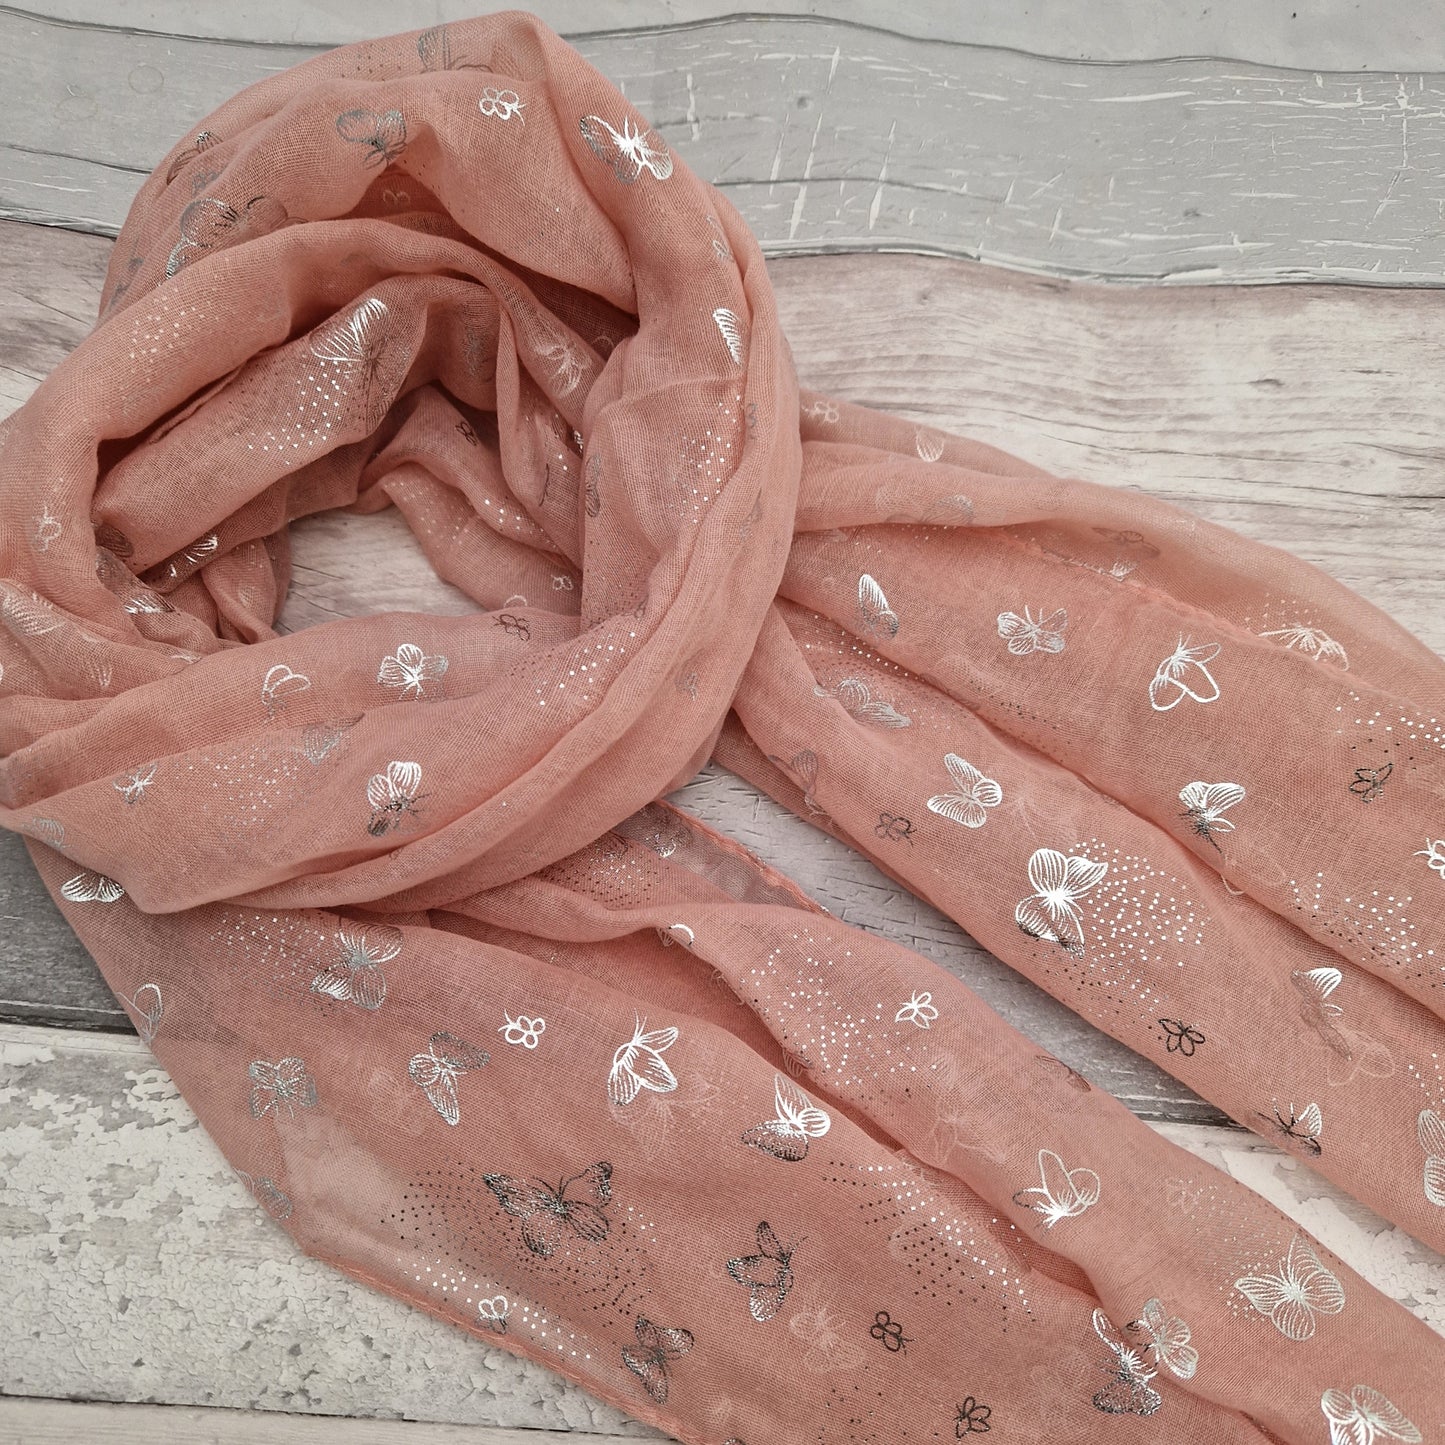 Pink and Silver Butterflies "Eco" Scarf